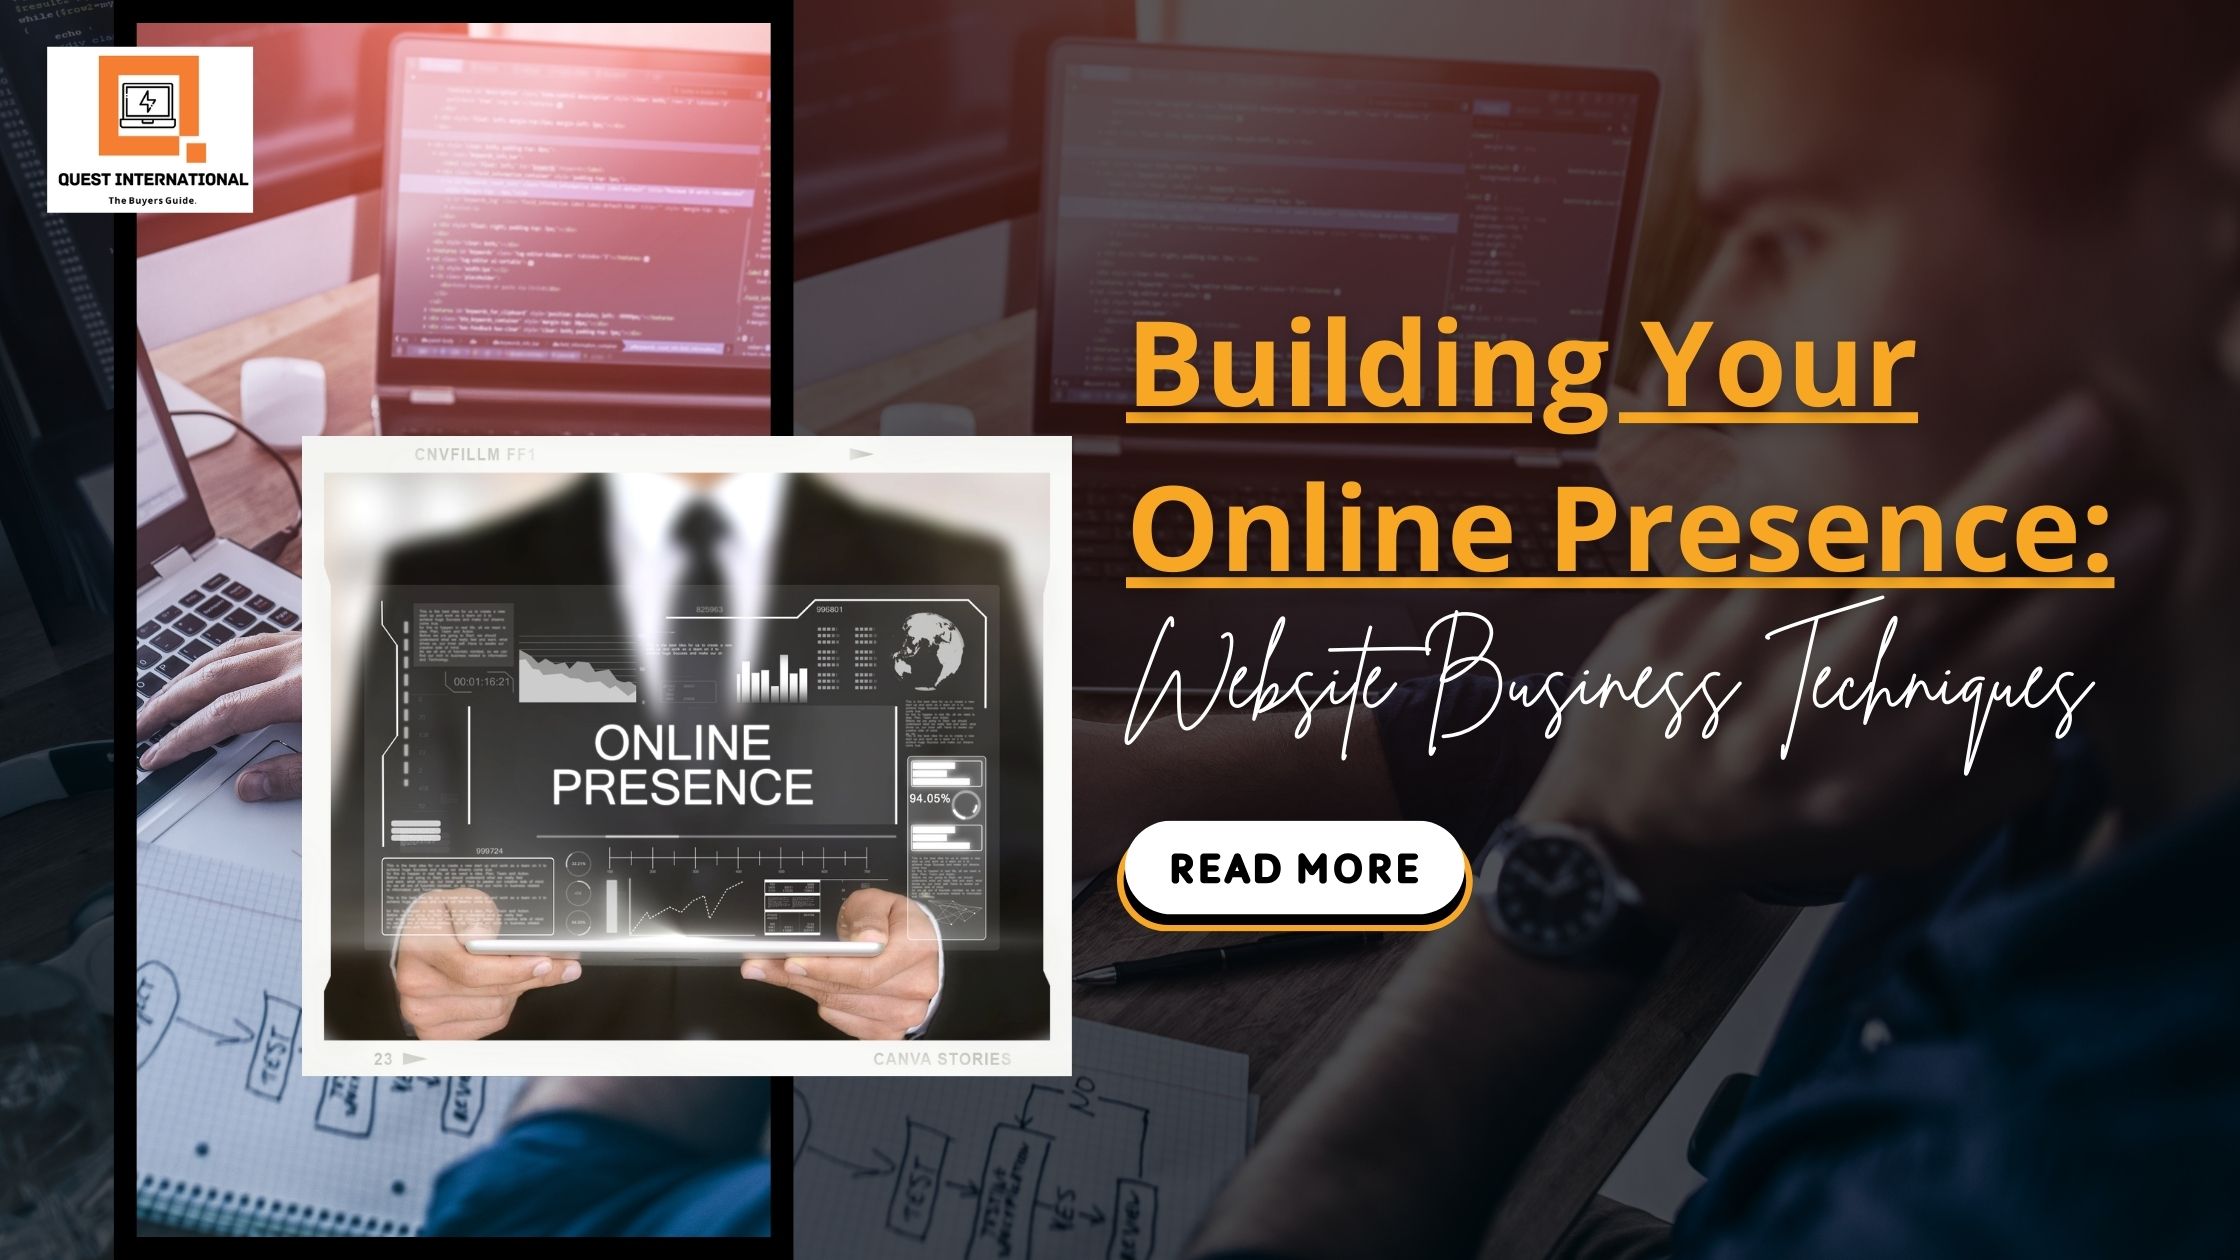 You are currently viewing Building Your Online Presence: Website Business Techniques